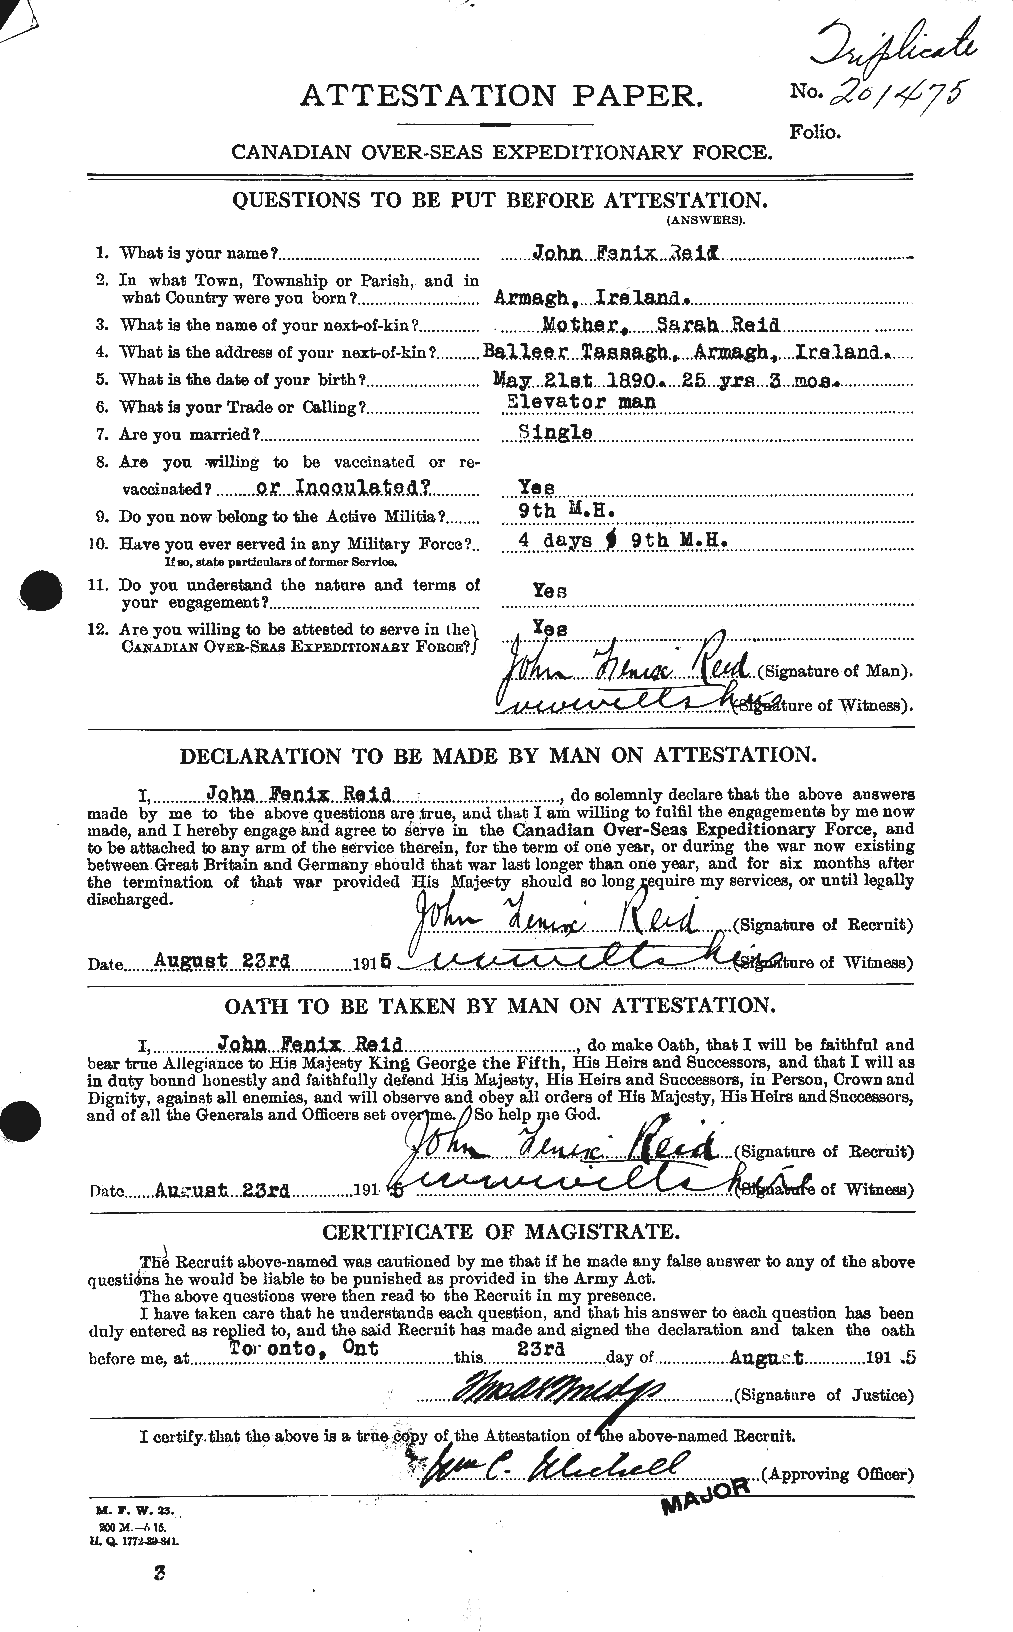 Personnel Records of the First World War - CEF 598837a